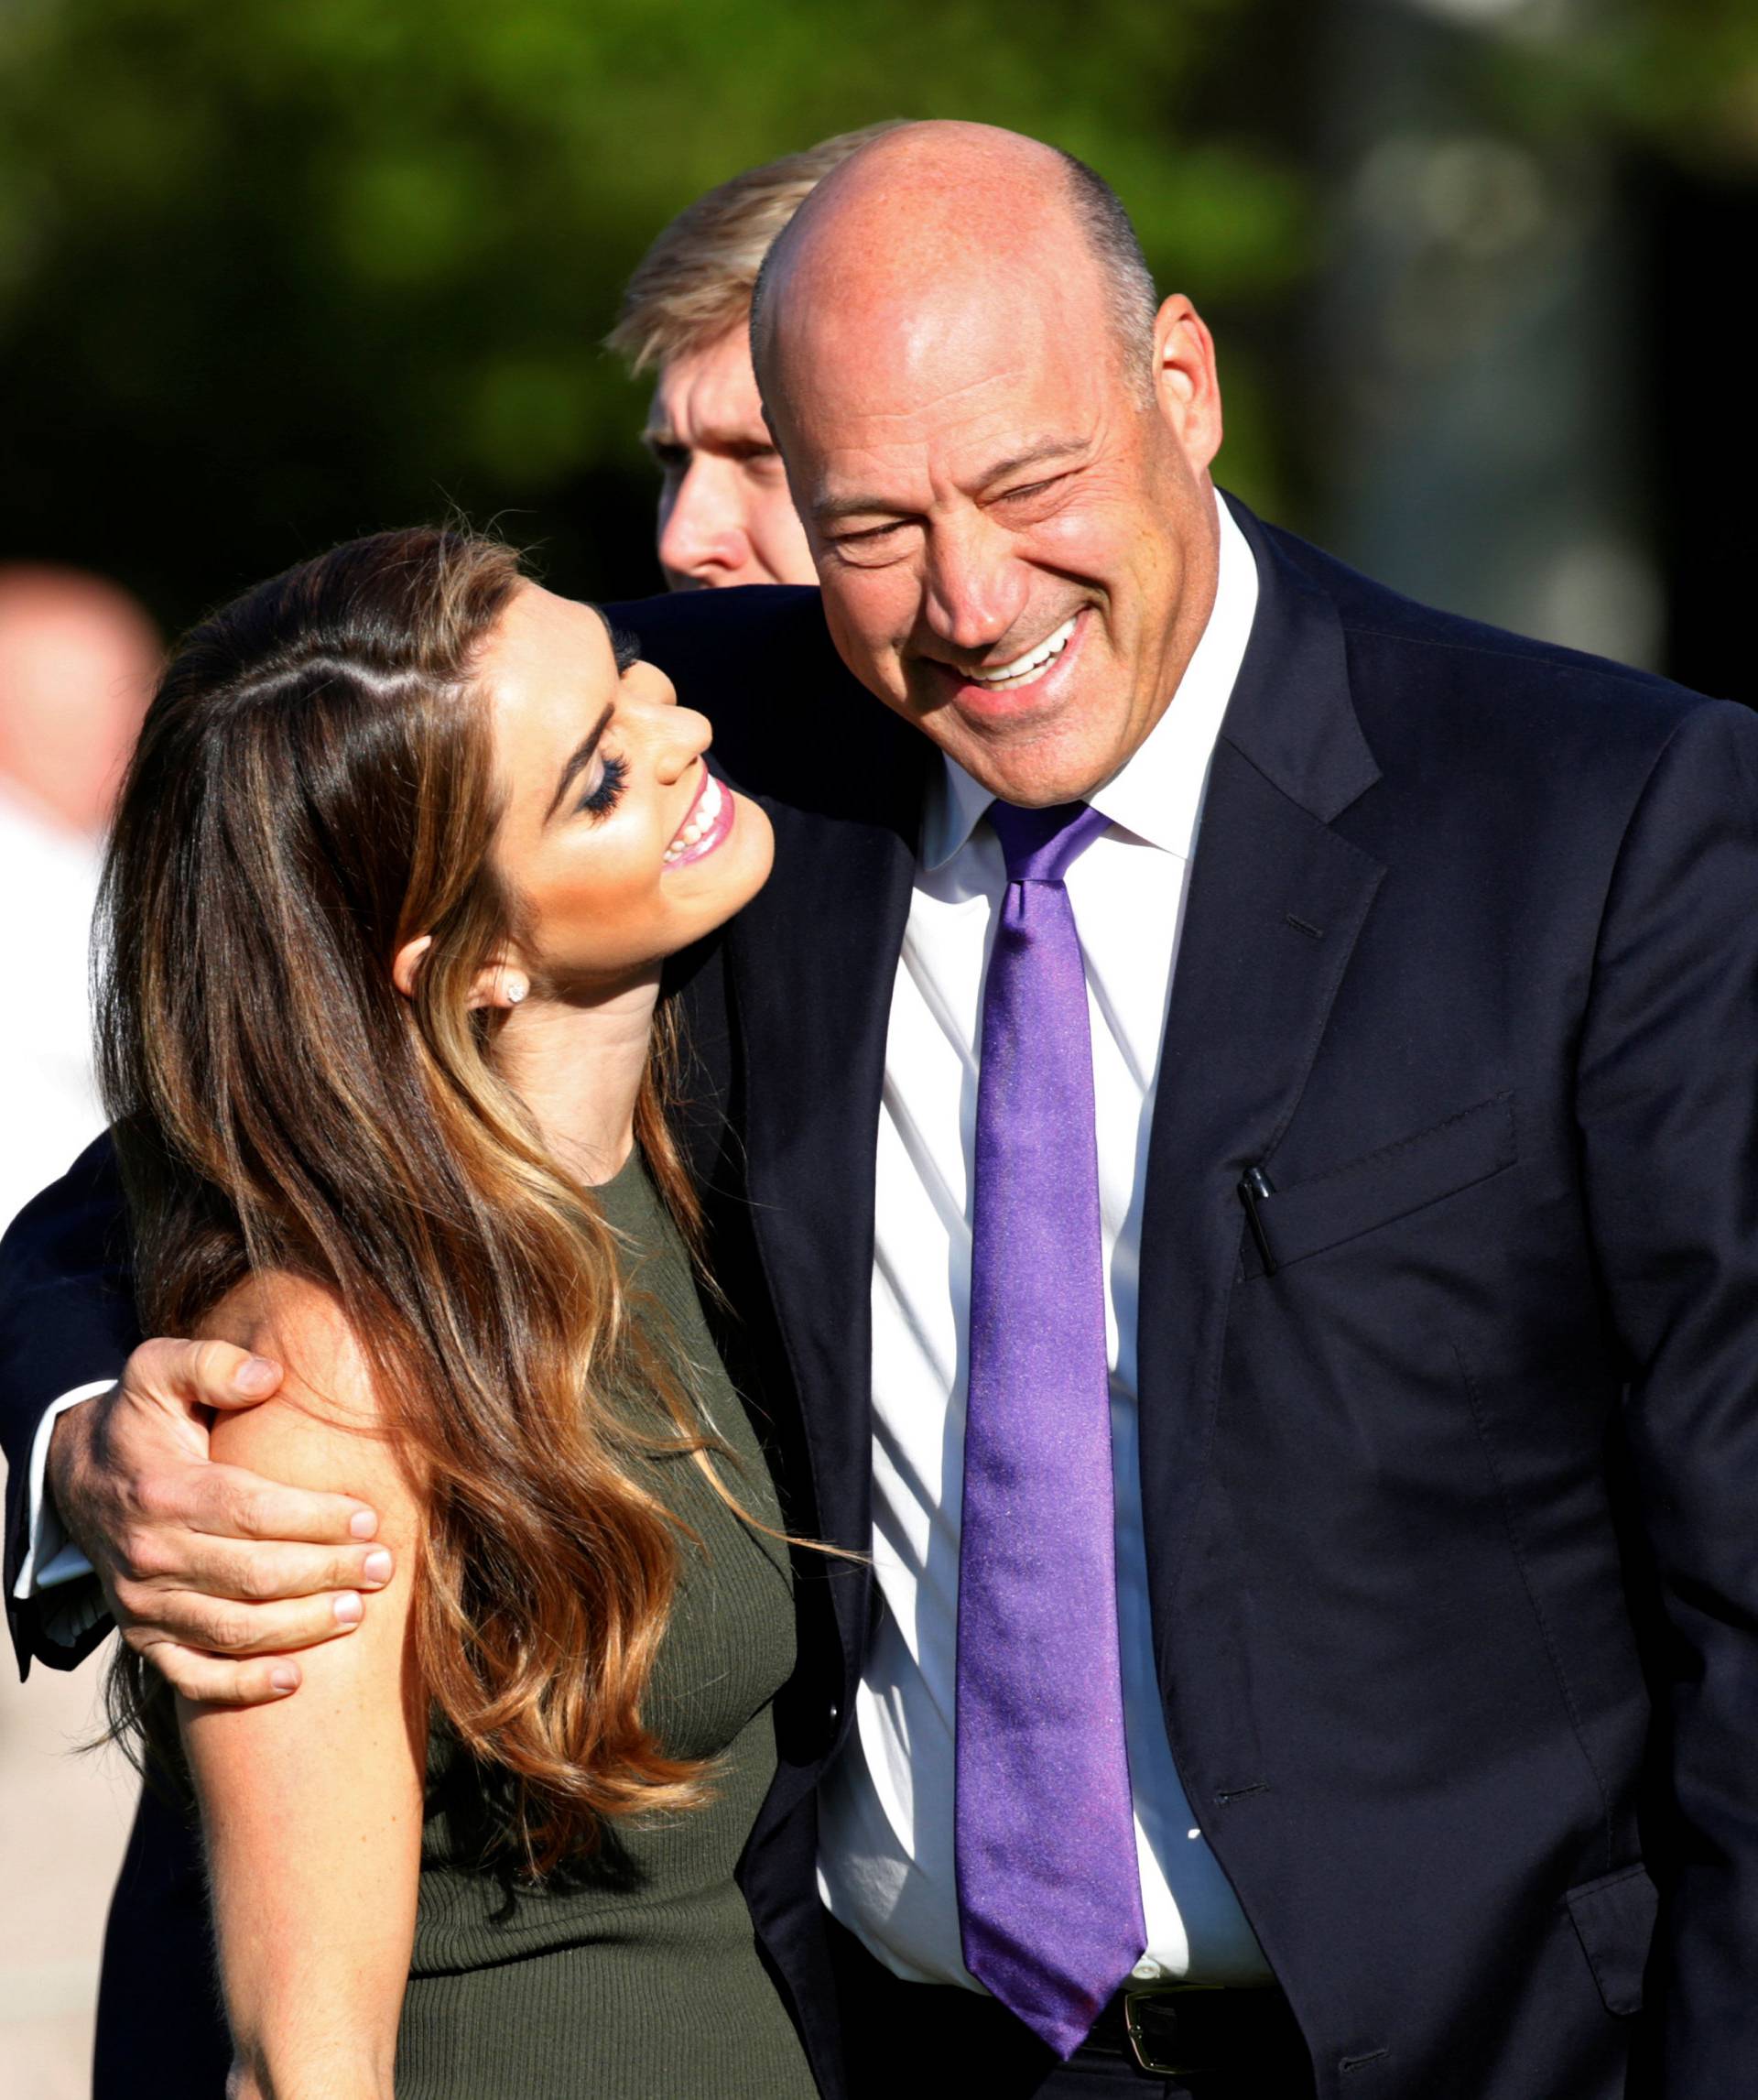 Trump's communication director Hope Hicks and Trump's economic adviser Gary Cohn speak before observing a moment of silence in remembrance of those lost in the 9/11 attacks at the White House in Washington